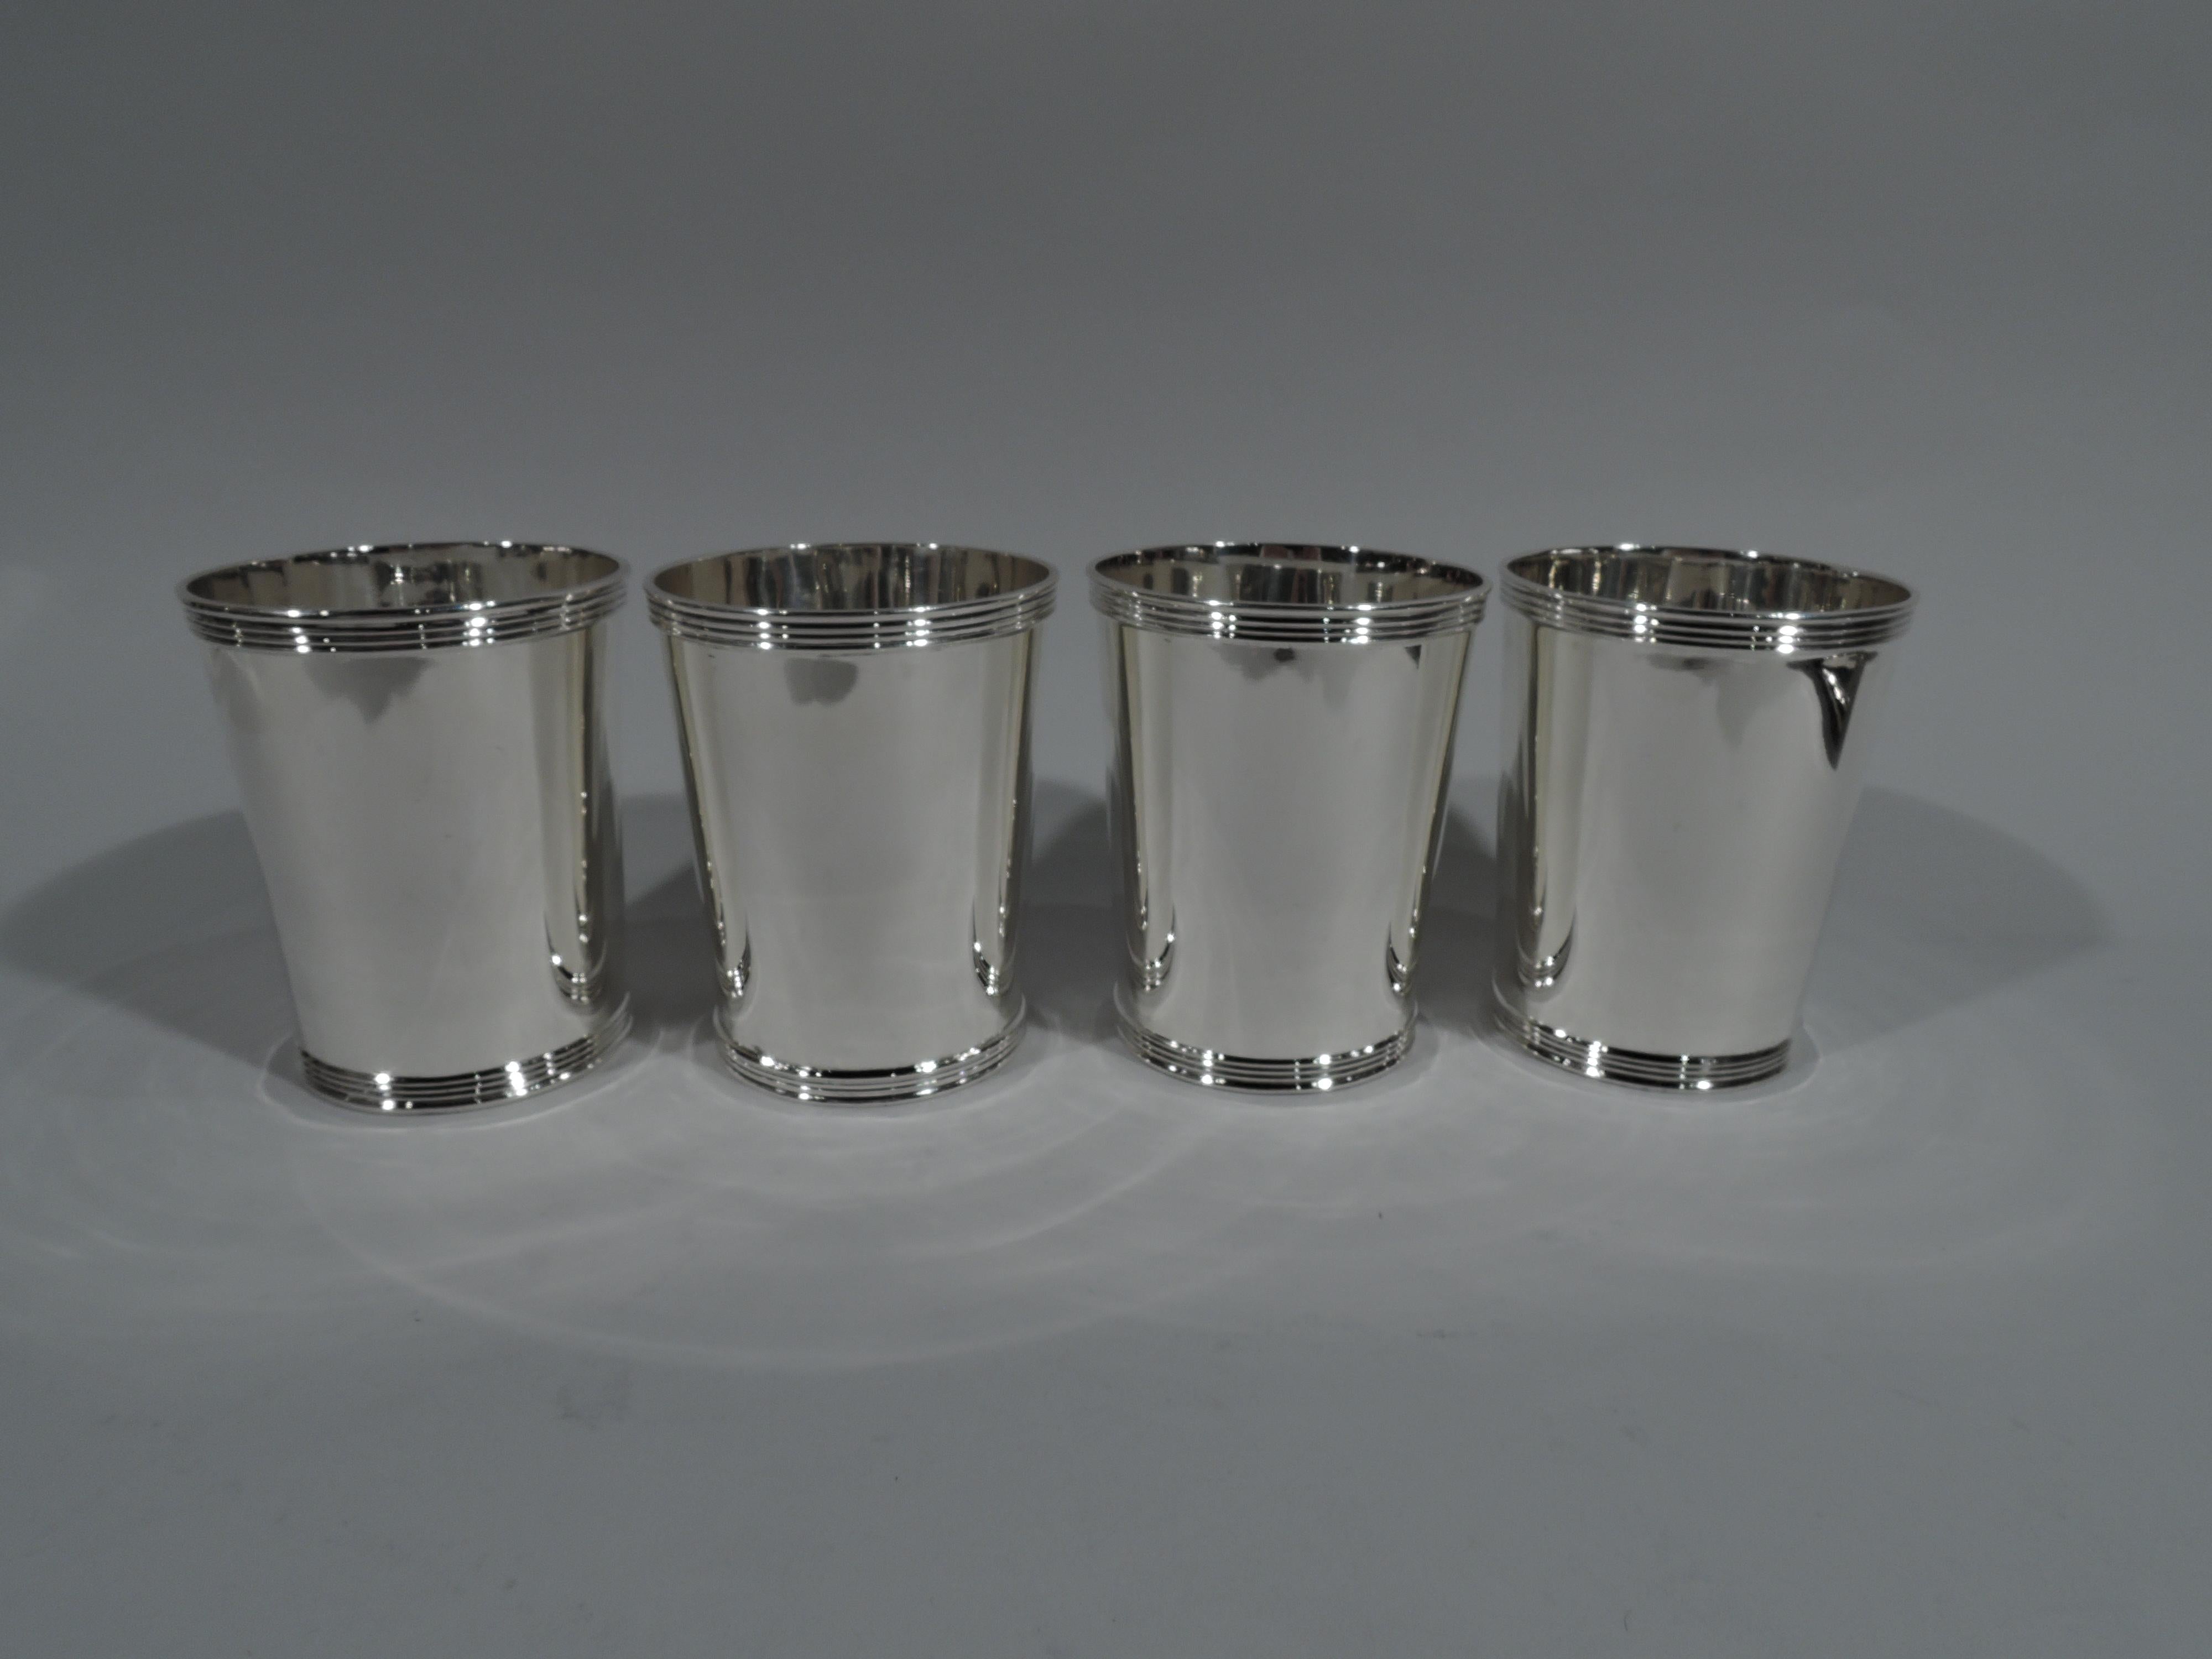 Set of 4 sterling silver mint julep cups. Made by Frank W. Smith in Gardner, Mass. Each: Straight and tapering sides and reeded rim and foot. Fully marked including maker’s stamp and no. 3759. One cup has retailer’s stamp (Caskey Jewelry Co.). Total